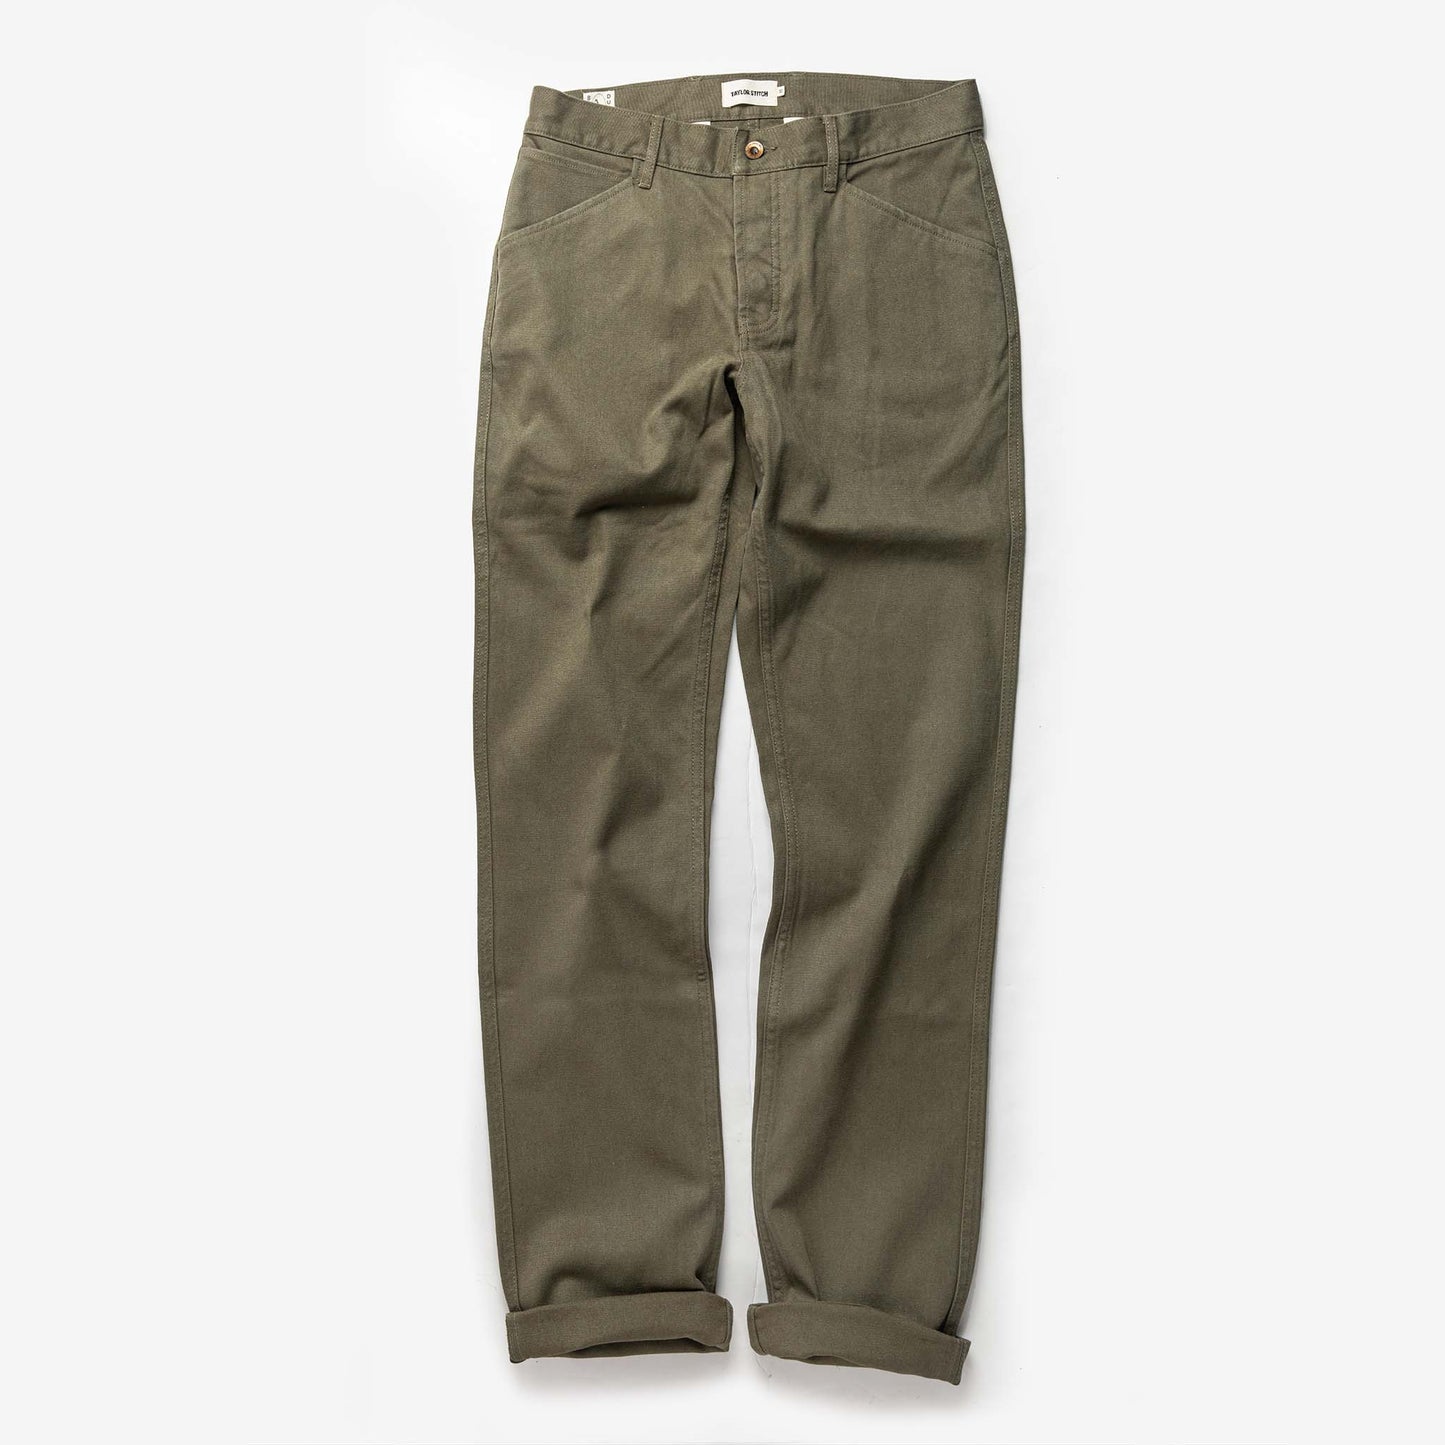 The Camp Pant in Boss Duck